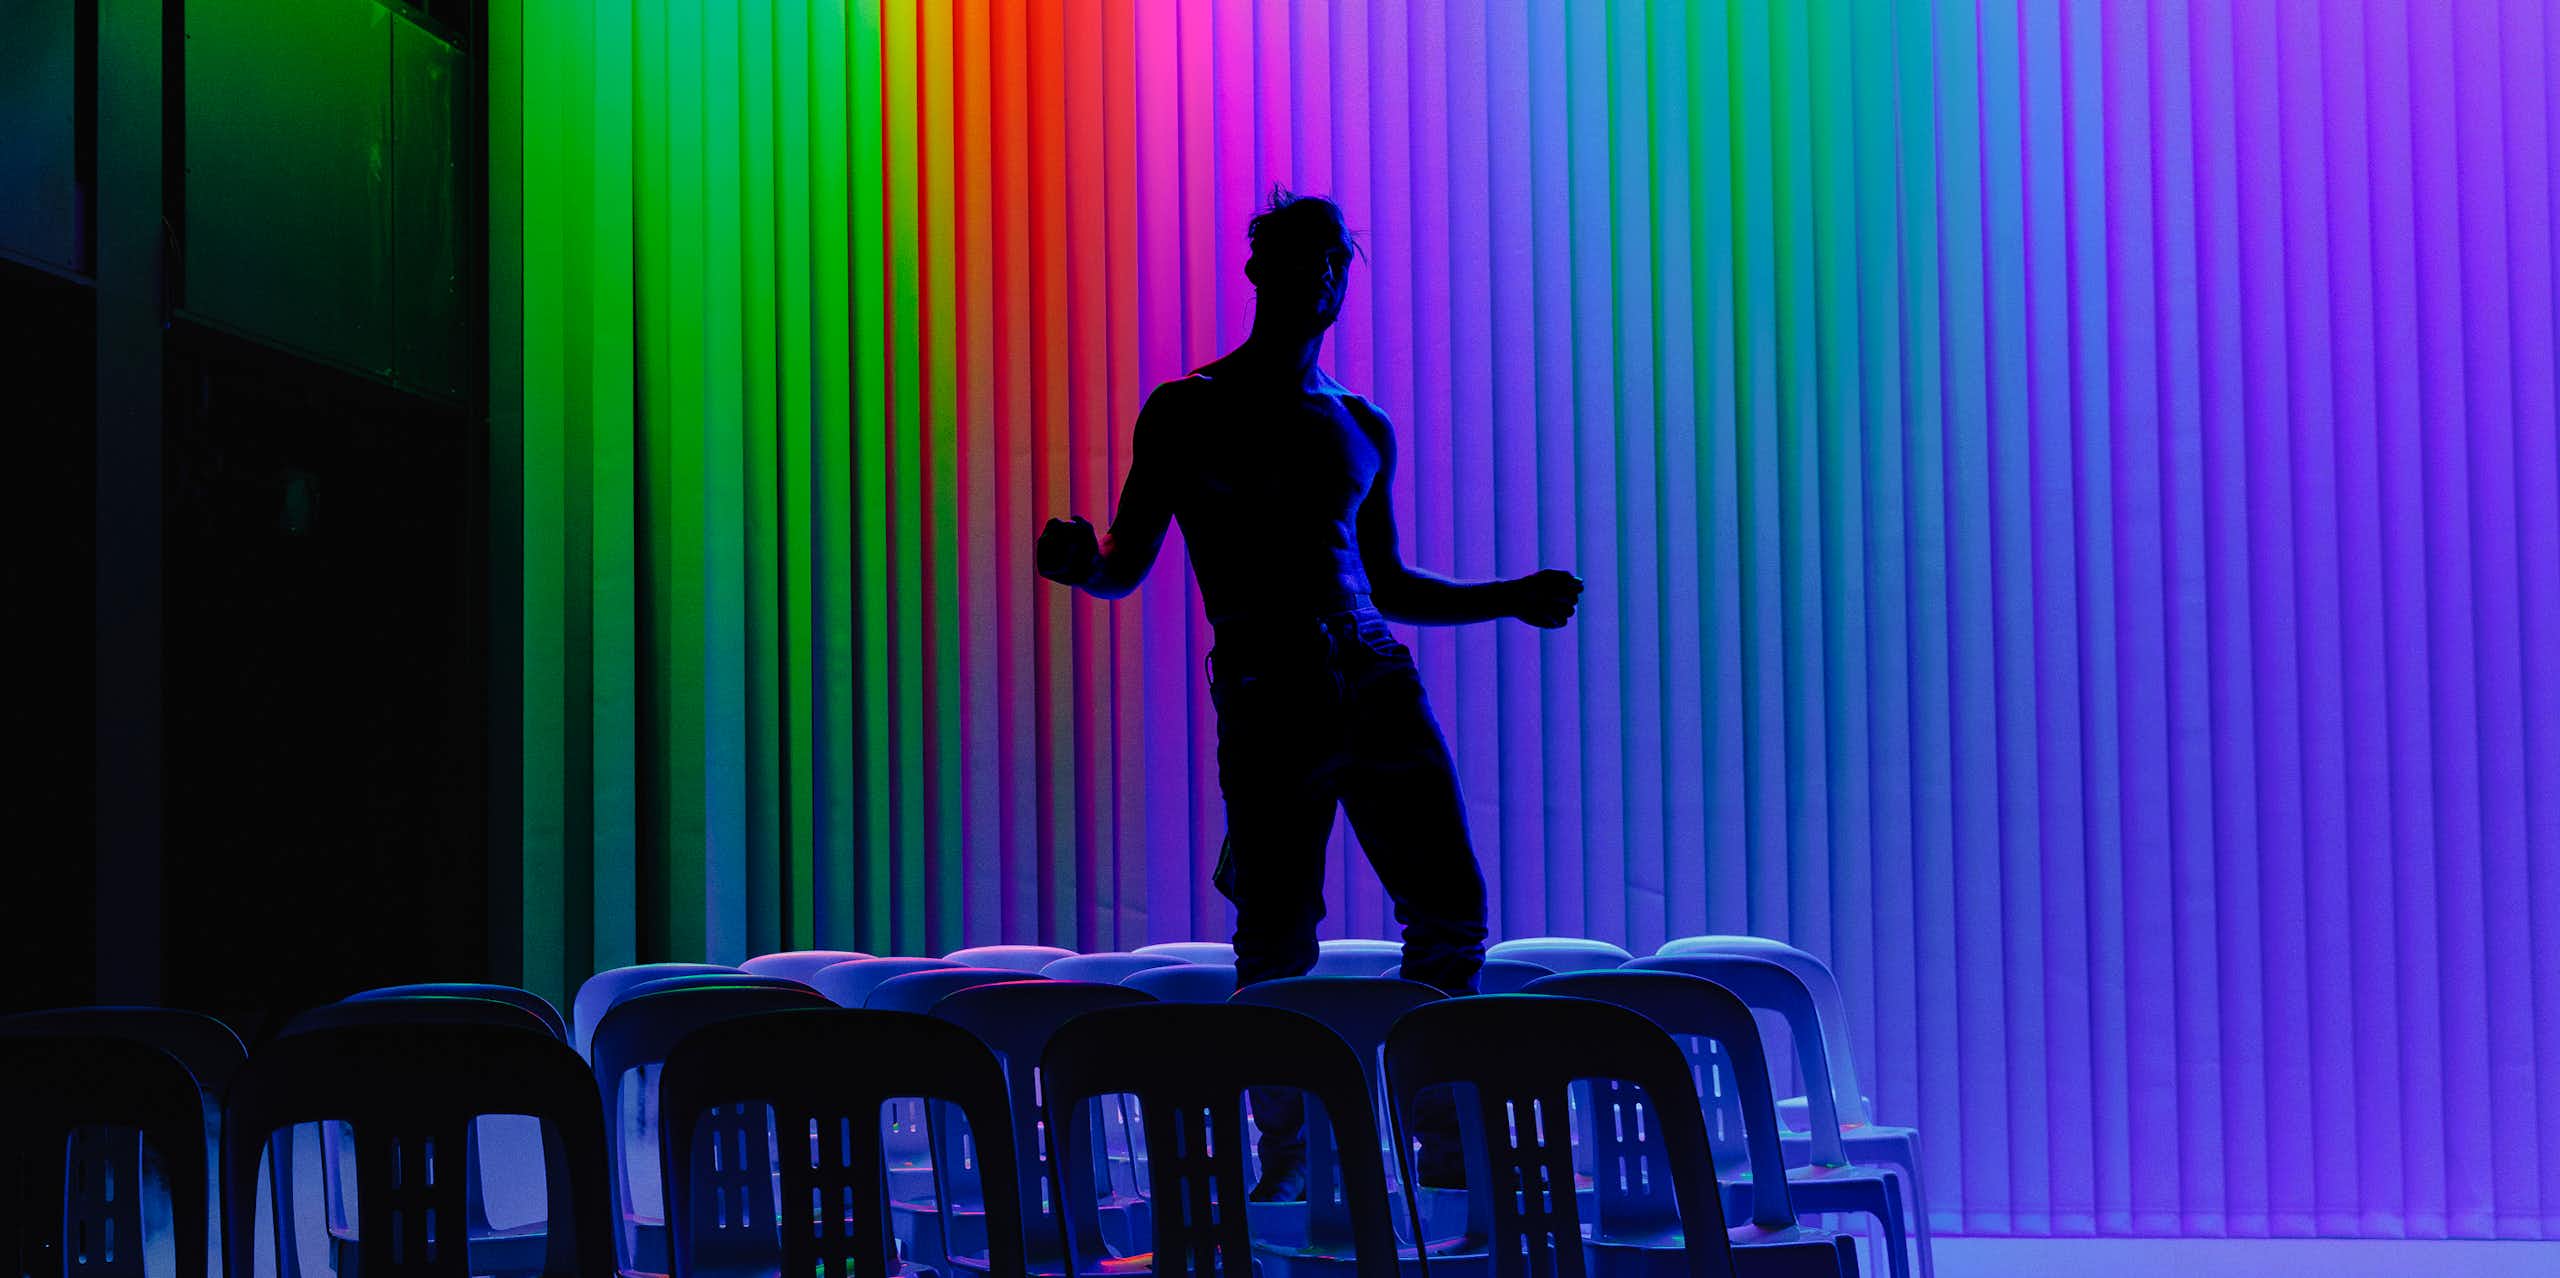 The silhouette of a man against a rainbow backdrop